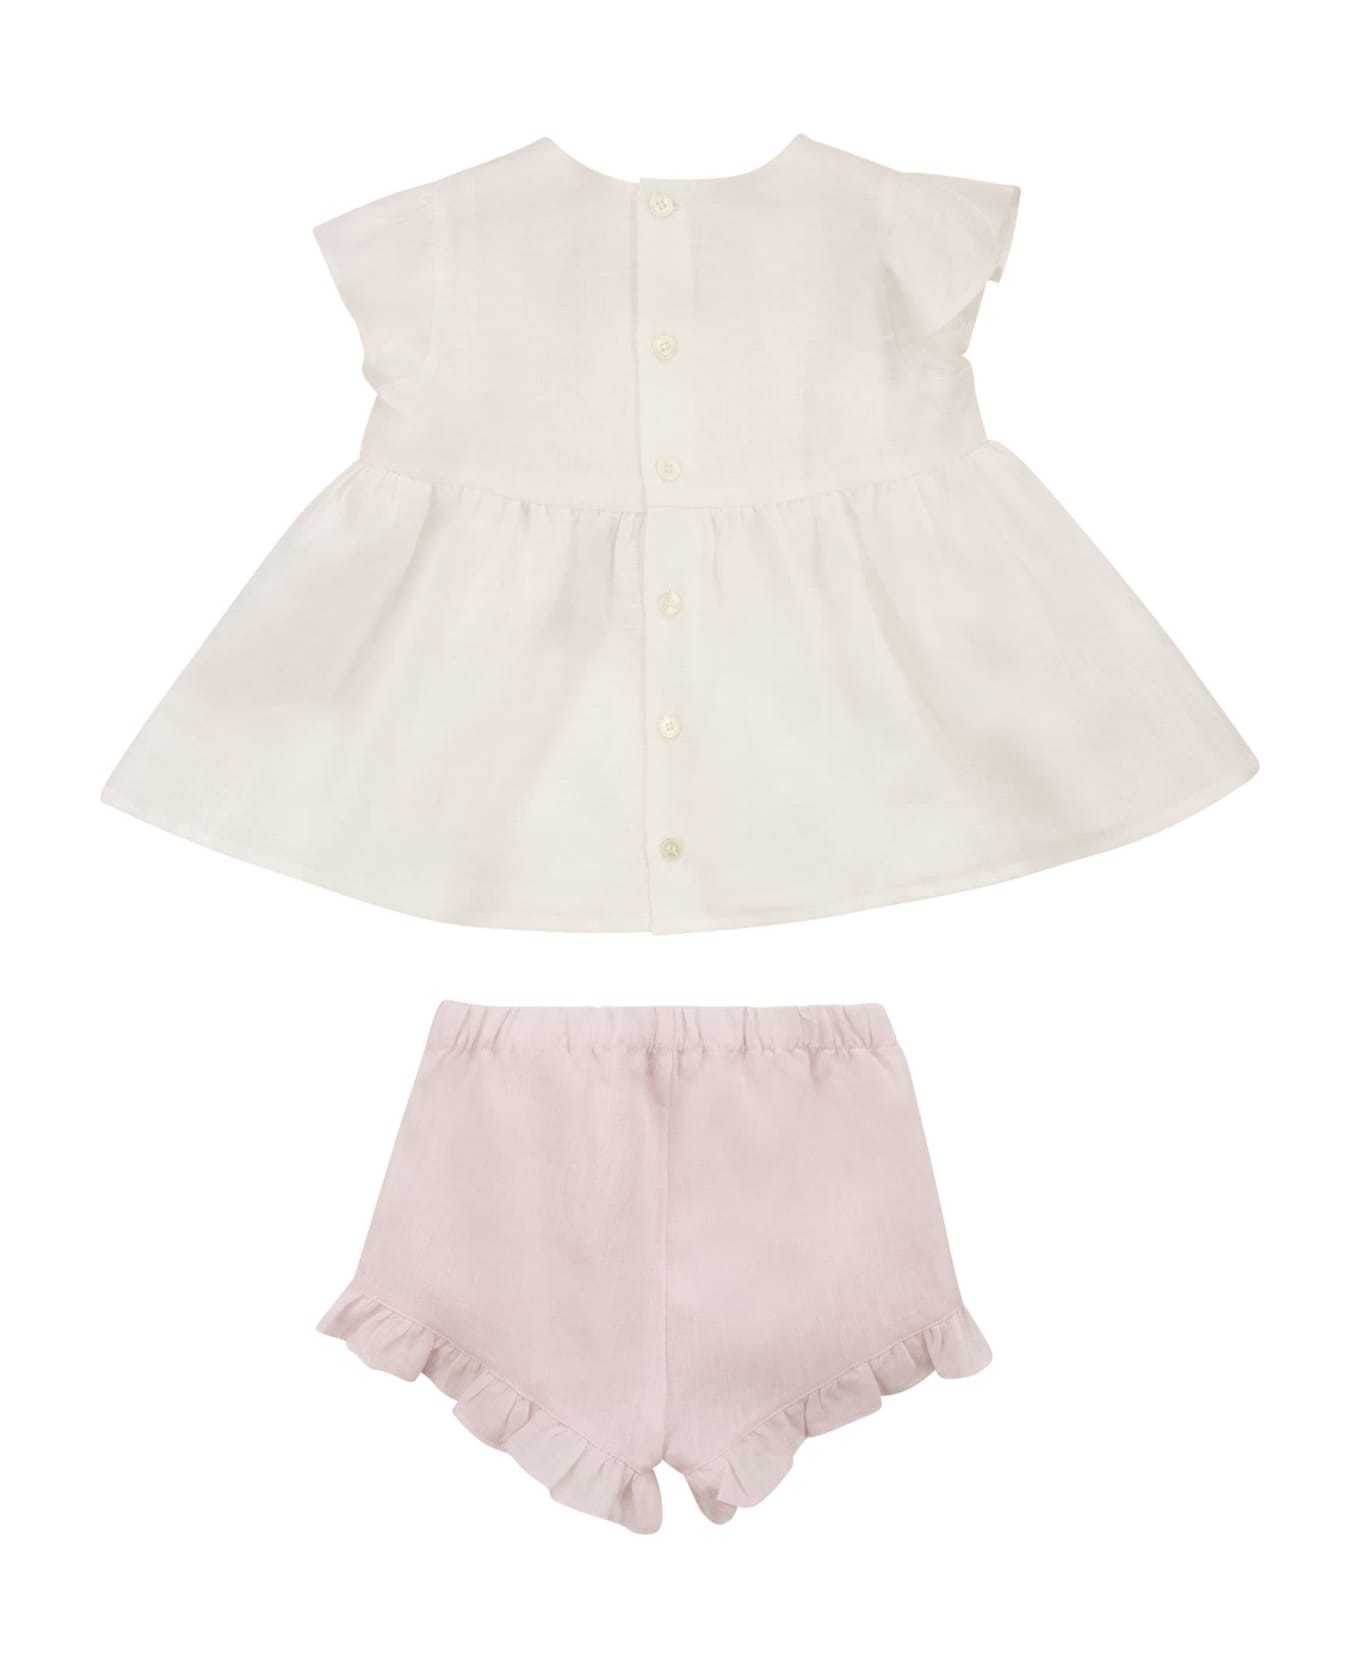 Il Gufo Linen Suit With Bows - White/pink ボディスーツ＆セットアップ